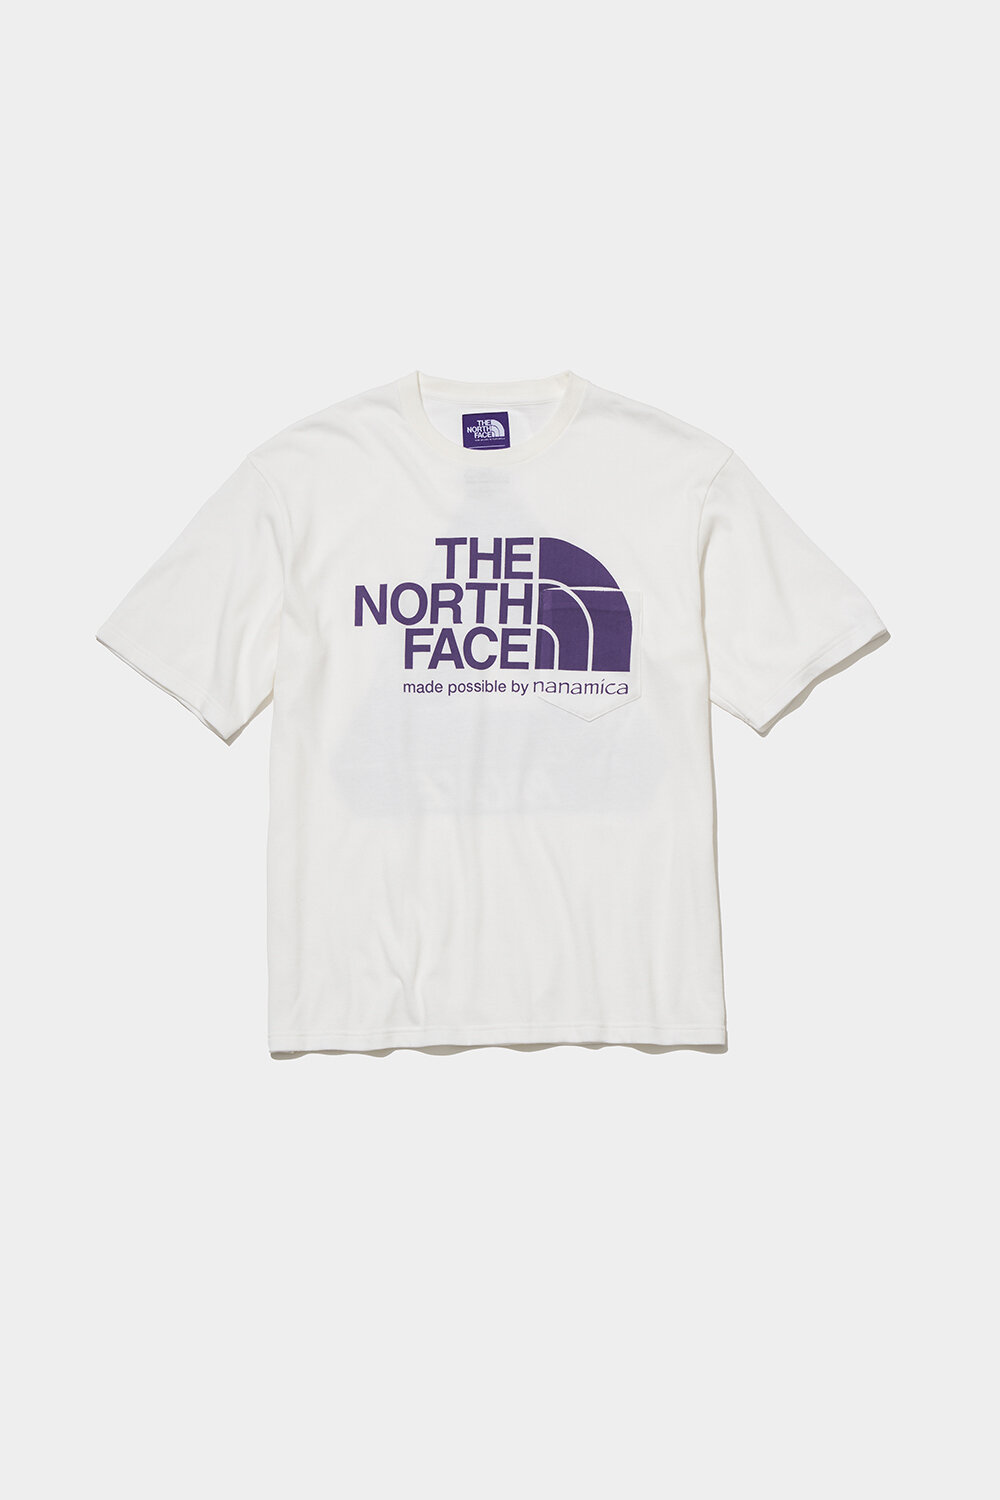 The North Face Purple Label x Palace Skateboards Spring/Summer '21 